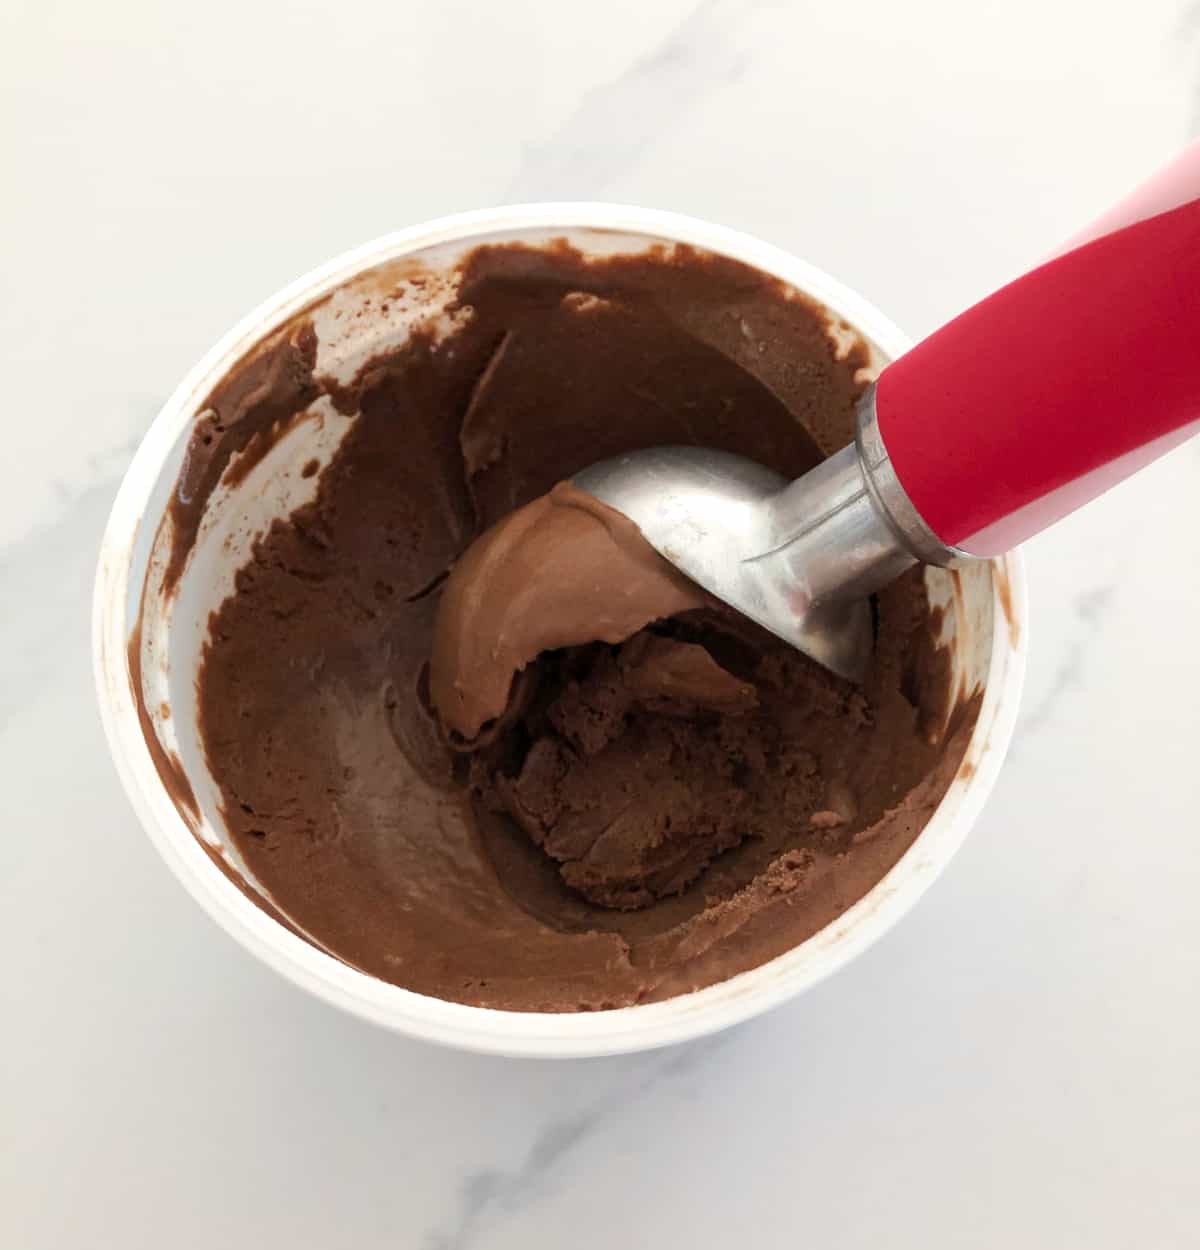 Scooping chocolate gelato with red handled ice cream scoop.